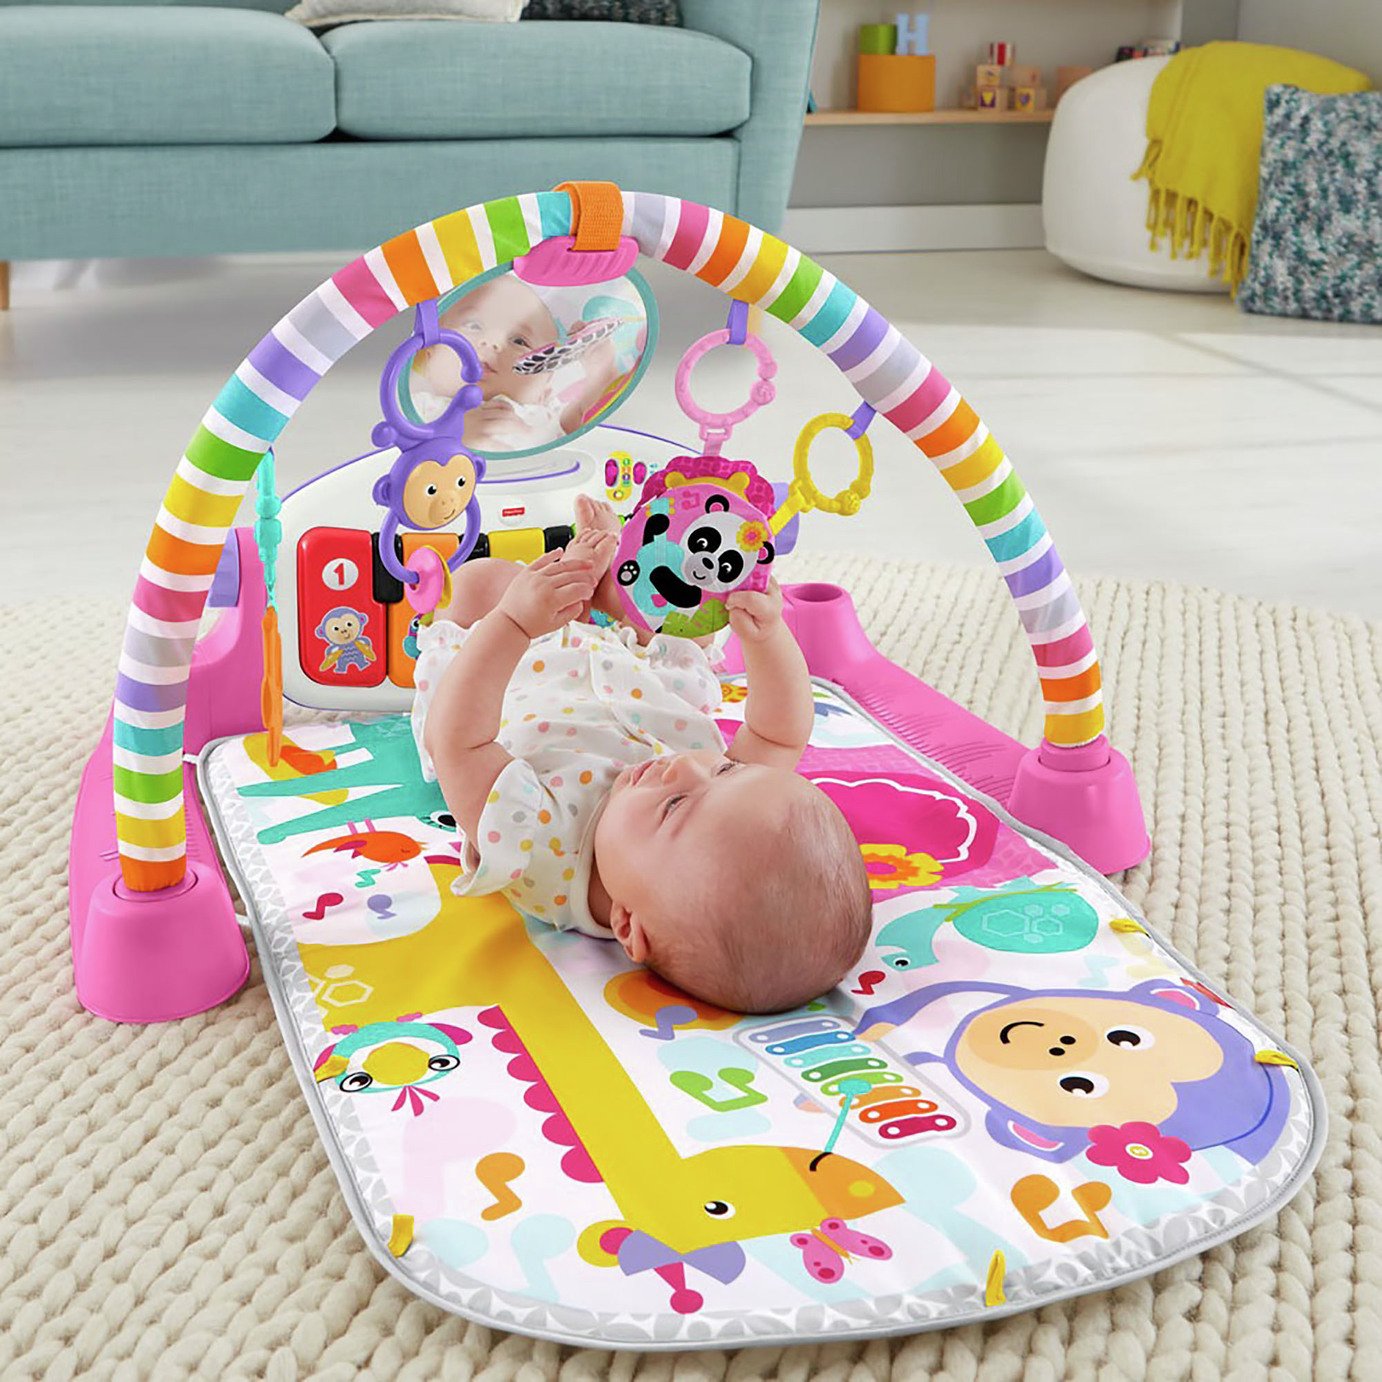 Fisher-Price Kick and Play Piano Gym Review